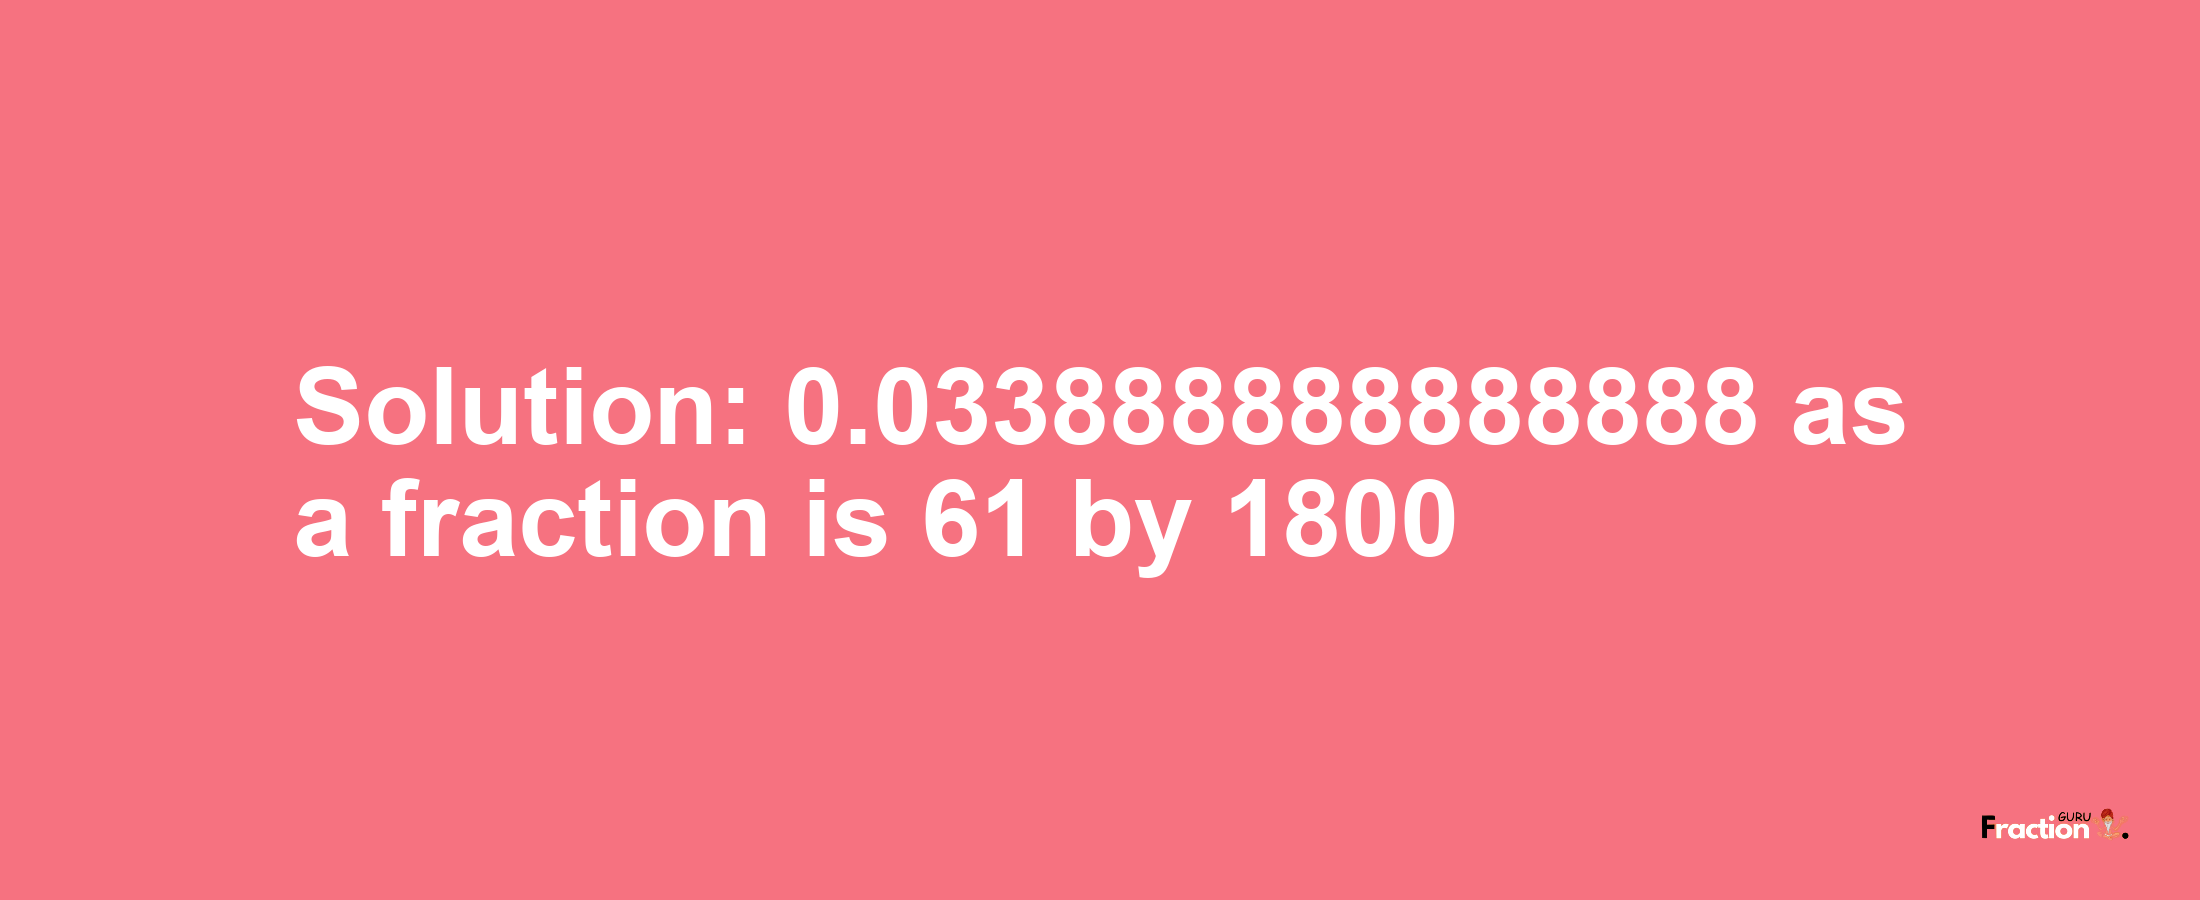 Solution:0.033888888888888 as a fraction is 61/1800